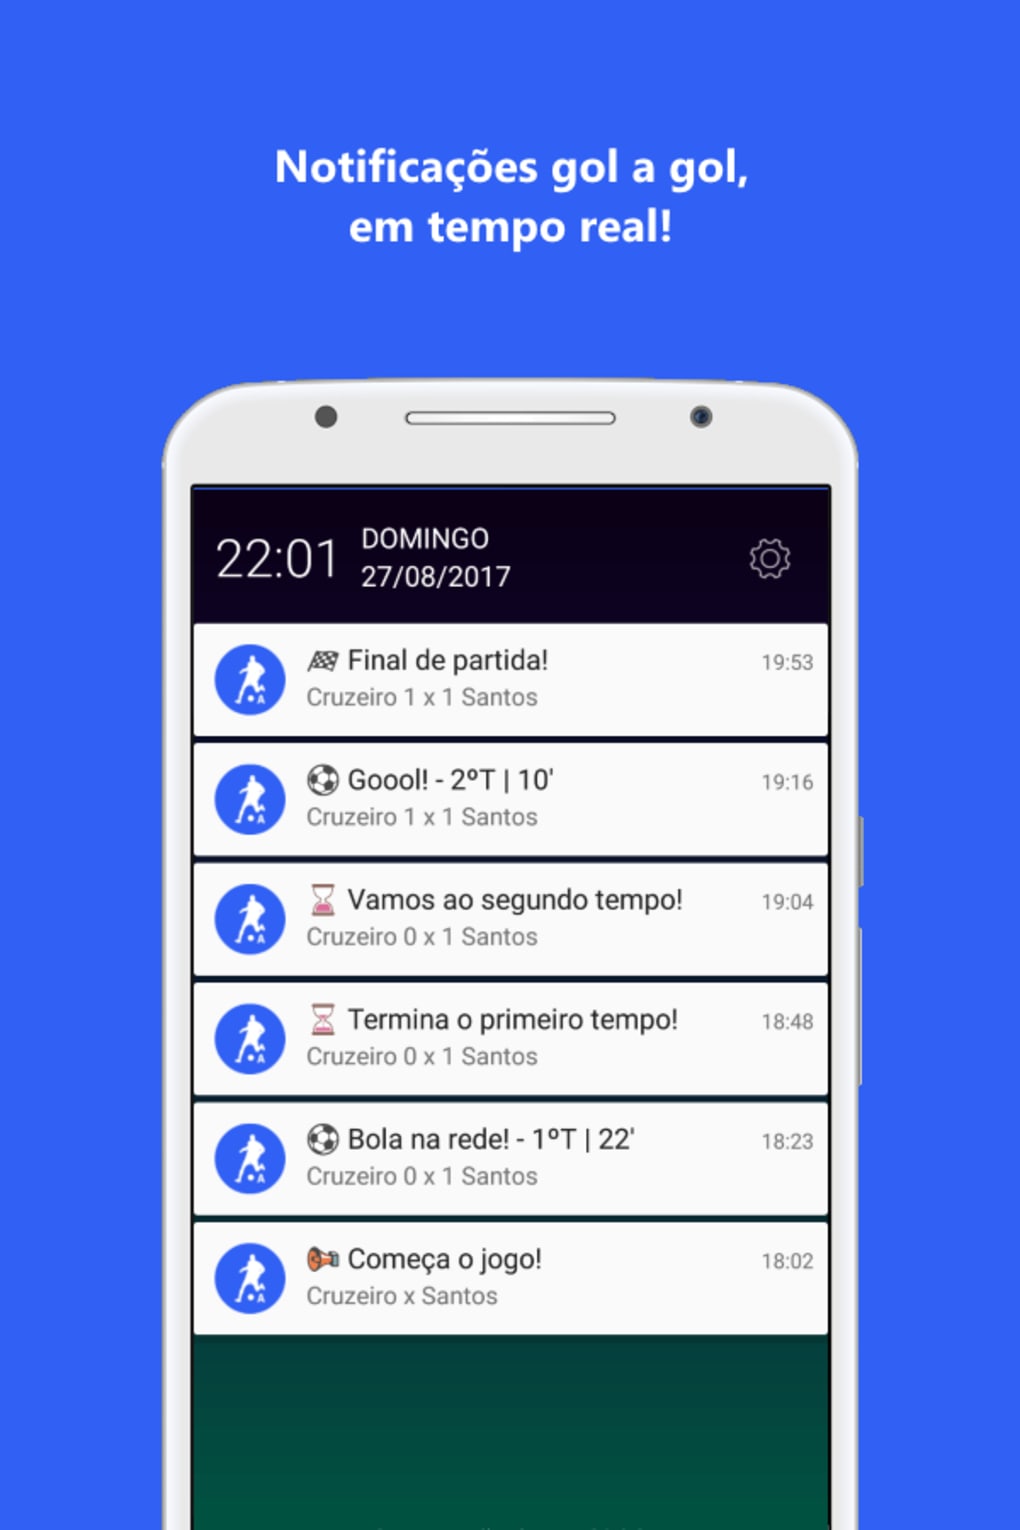 Serie A / Serie B Calcio::Appstore for Android